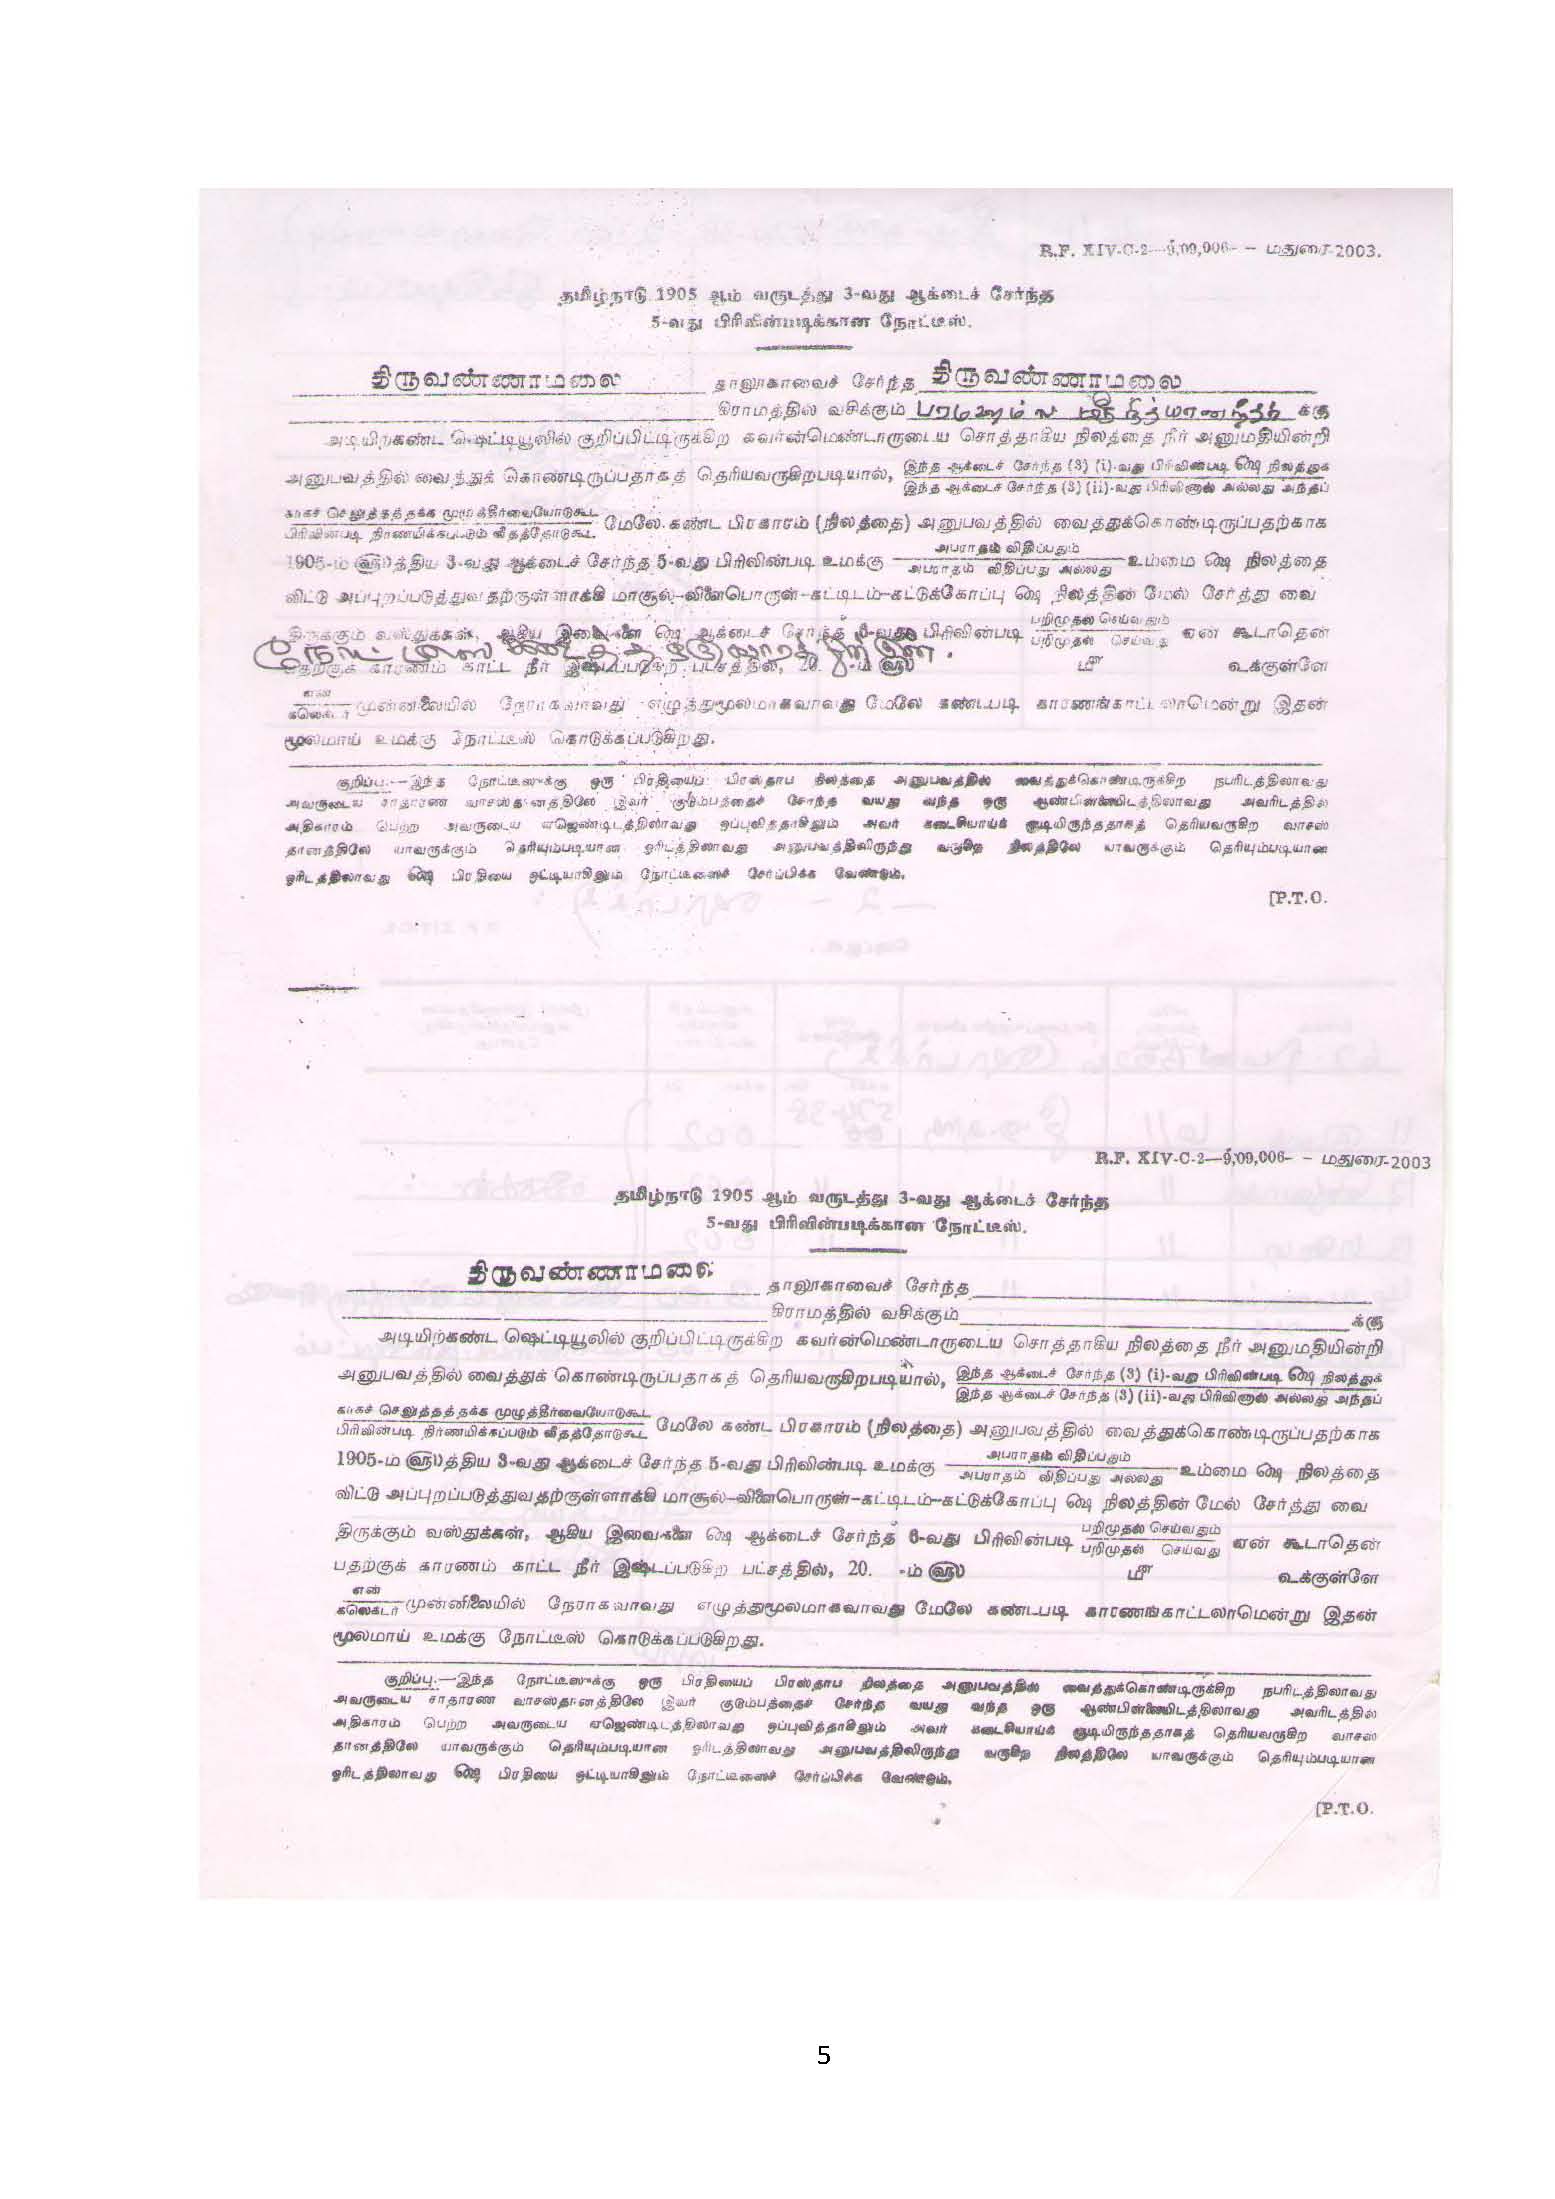 Pavalakundru_Dossier rev2_Page_005